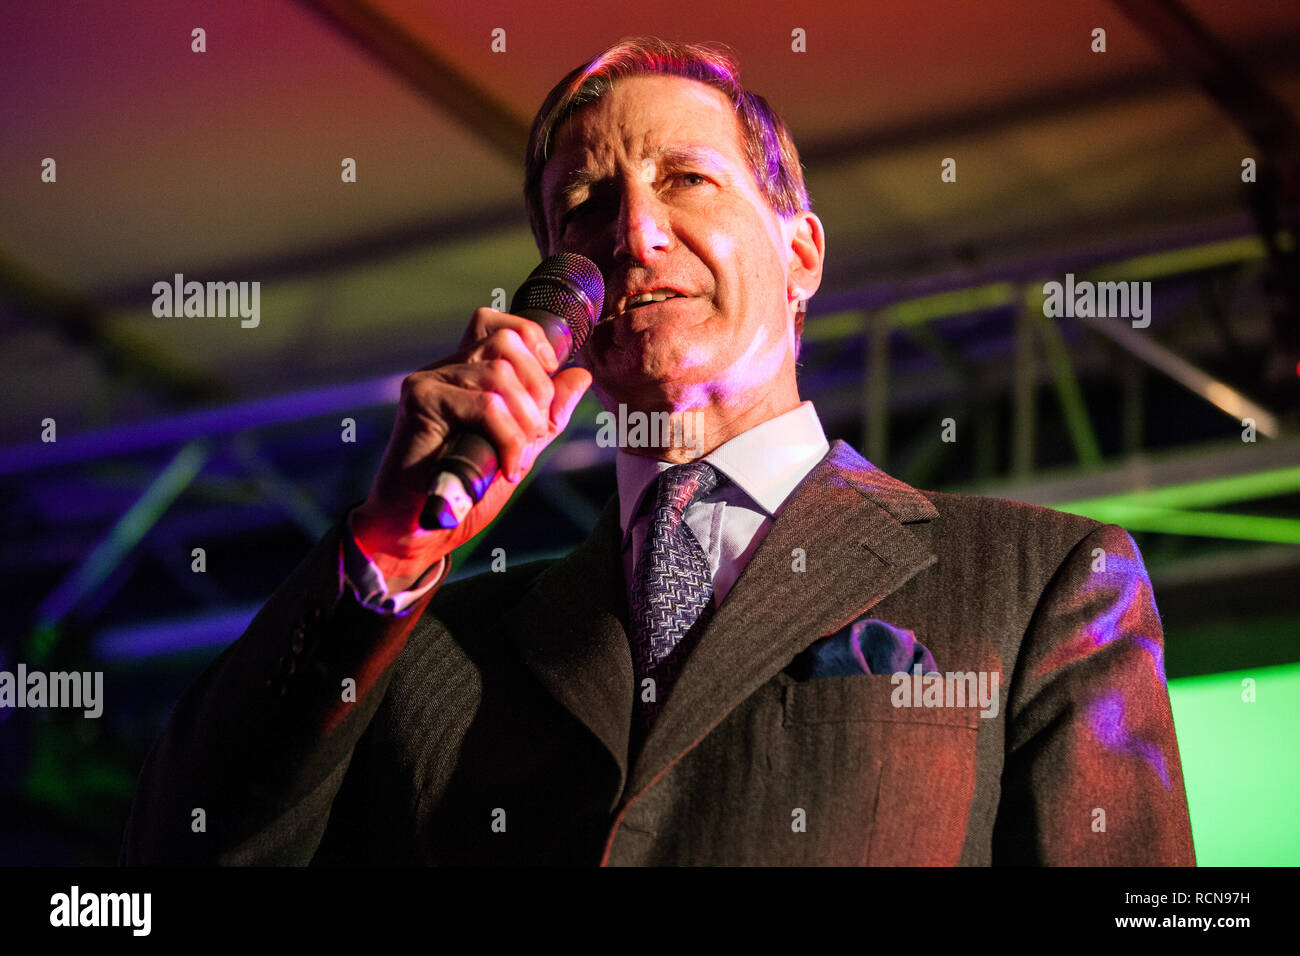 London, UK. 15th January, 2019. Dominic Grieve, Conservative MP for Beaconsfield, addresses pro-EU activists attending a People's Vote rally in Parliament Square as MPs vote in the House of Commons on Prime Minister Theresa May's proposed final Brexit withdrawal agreement. Credit: Mark Kerrison/Alamy Live News Stock Photo